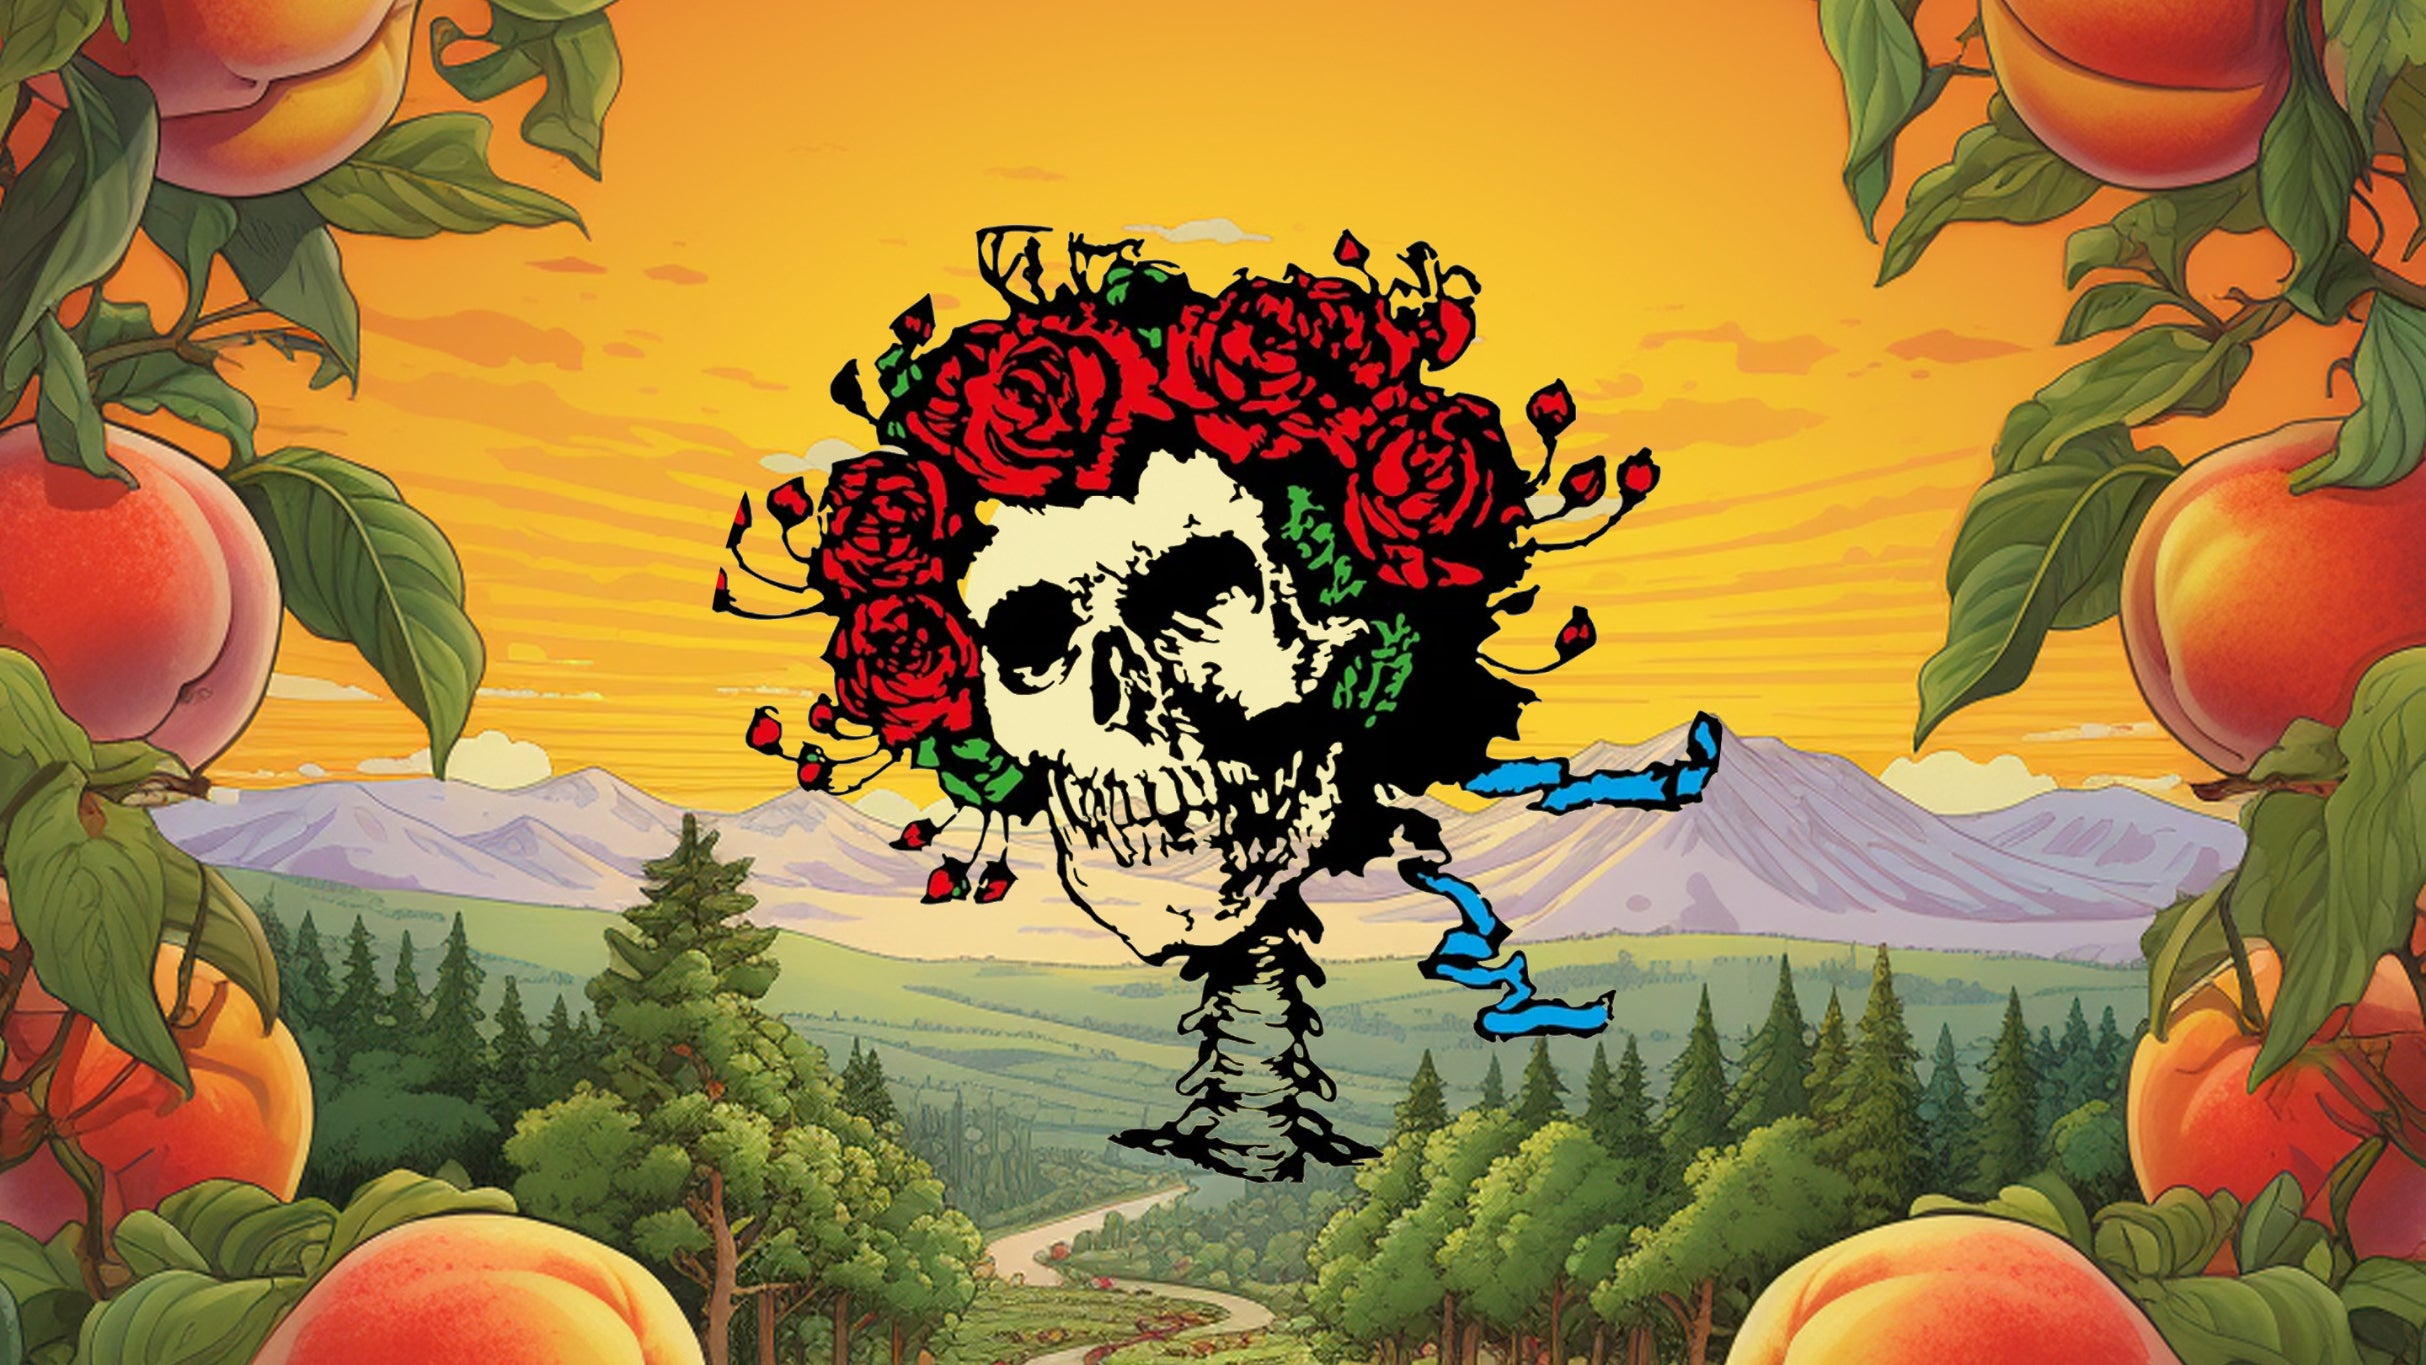 Live Dead & Brothers: An All-Star Celebration of Grateful Dead & Allma pre-sale code for early tickets in St Petersburg